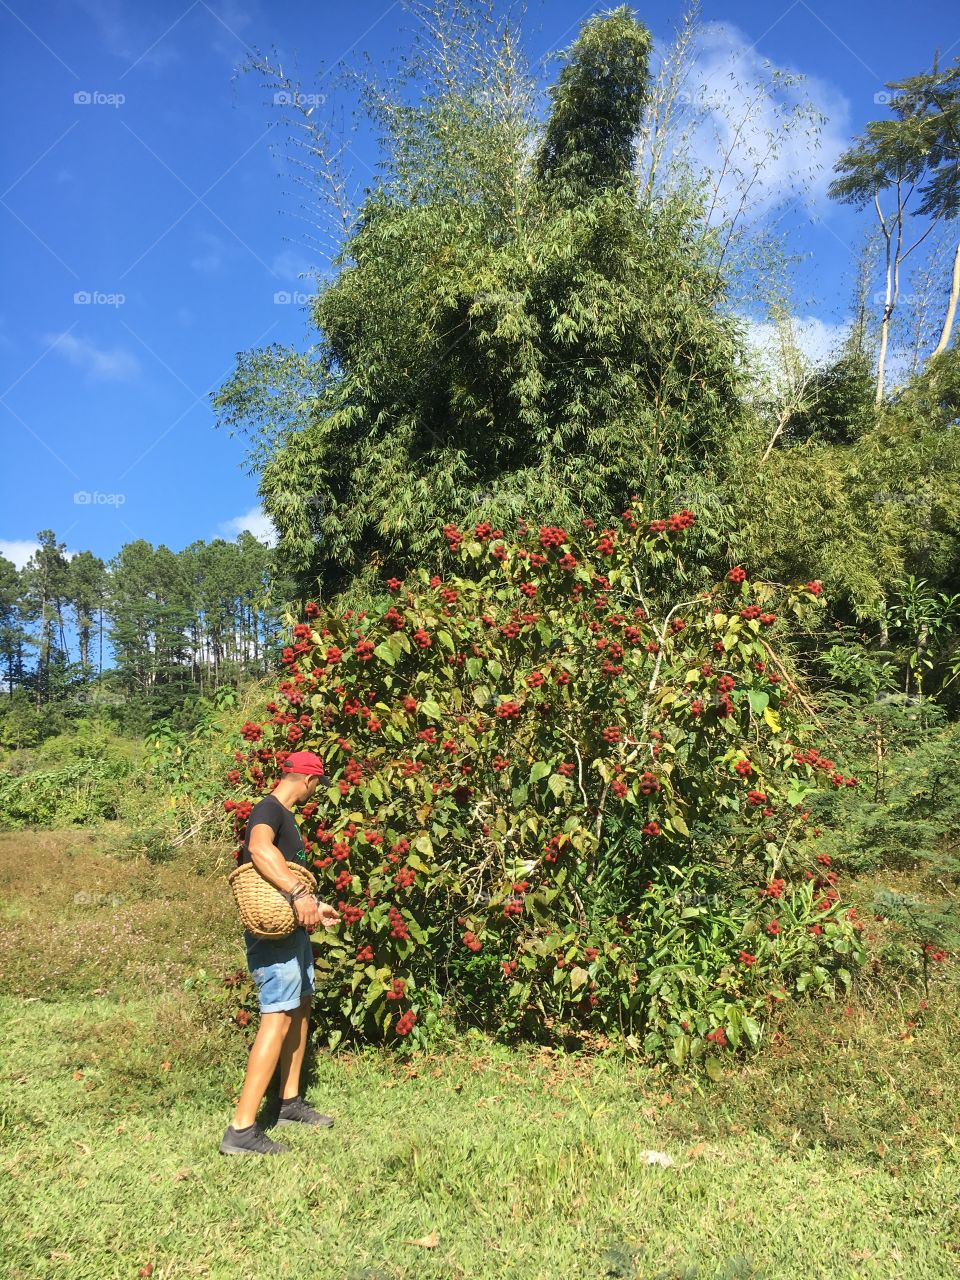 Getting a tour of a traditional coffee farm in the mountains outside of Trinidad, Cuba. This plant is used as natural lip color by women in Cuba (and yes, it will stain your fingertips!)